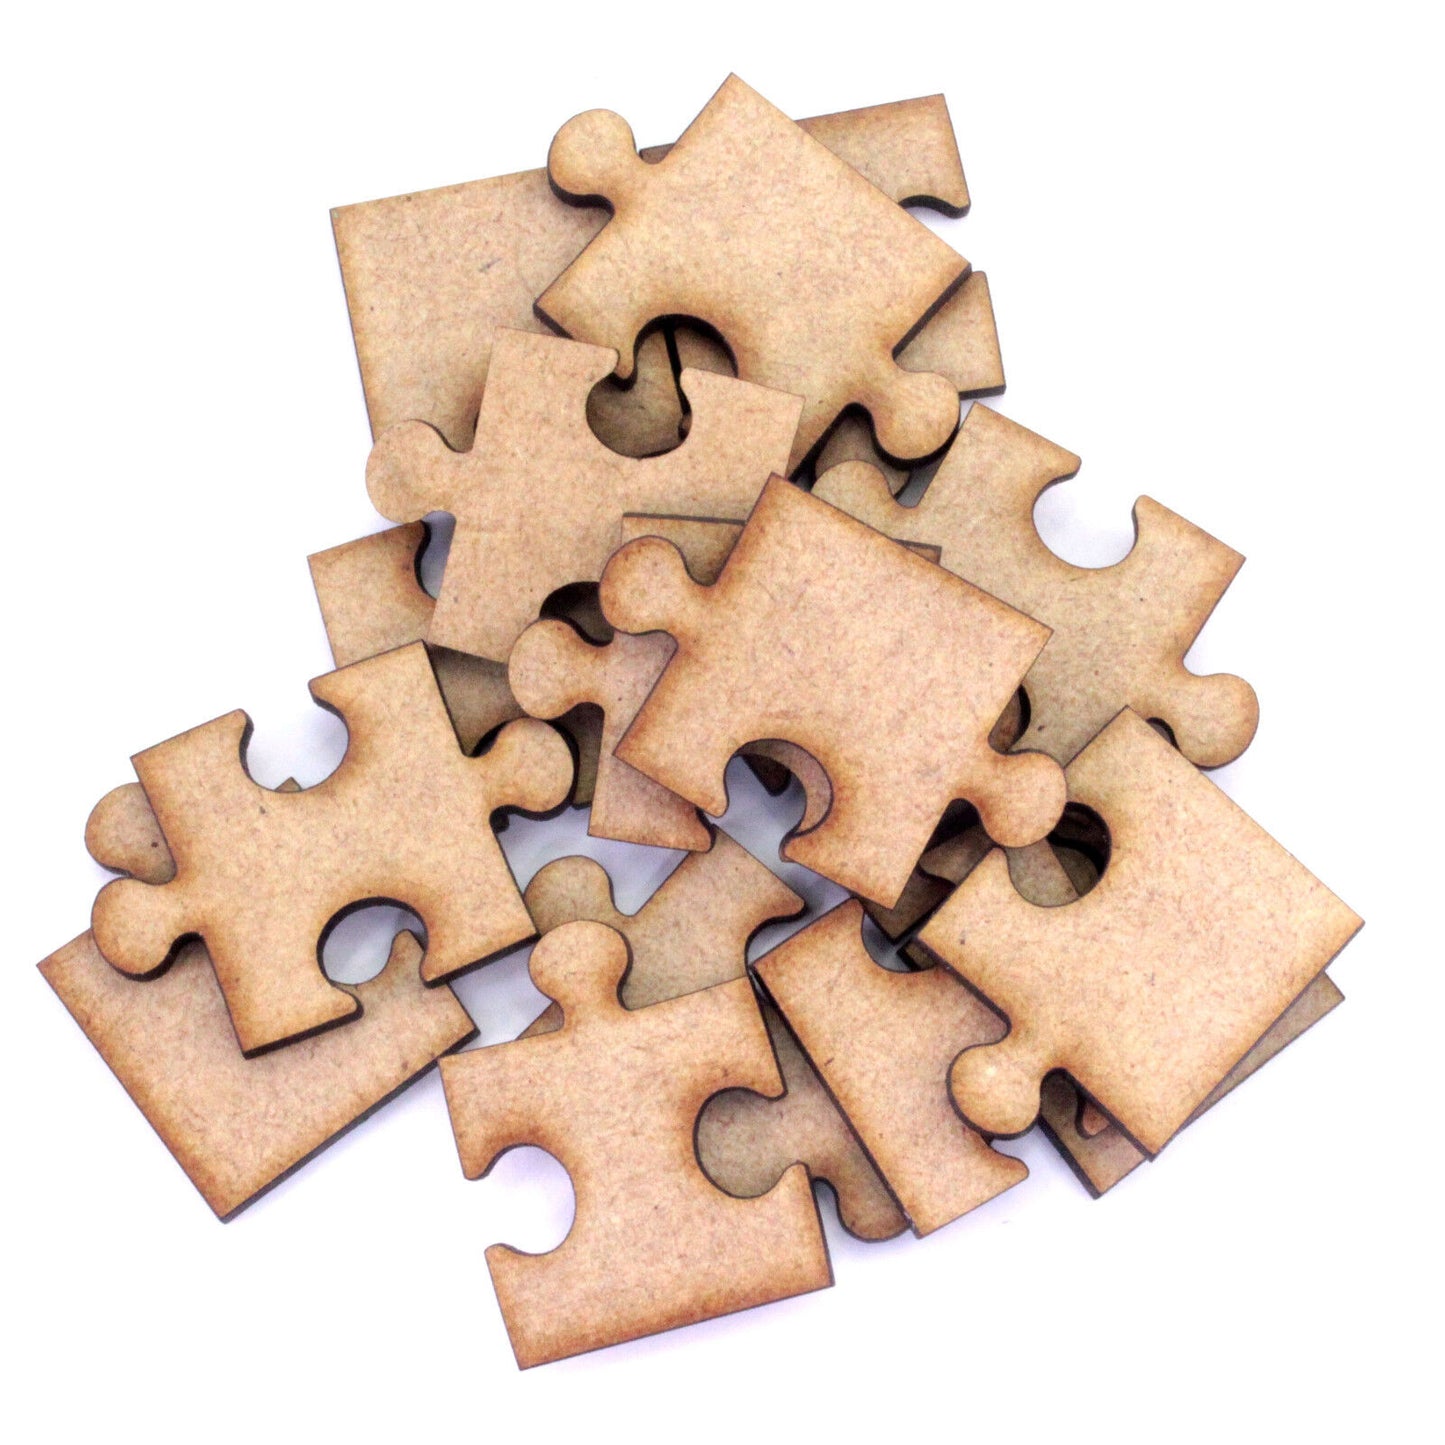 Jigsaw Piece Square MDF Craft Shapes. 4 Puzzle Size Options. Cut From 2mm MDF